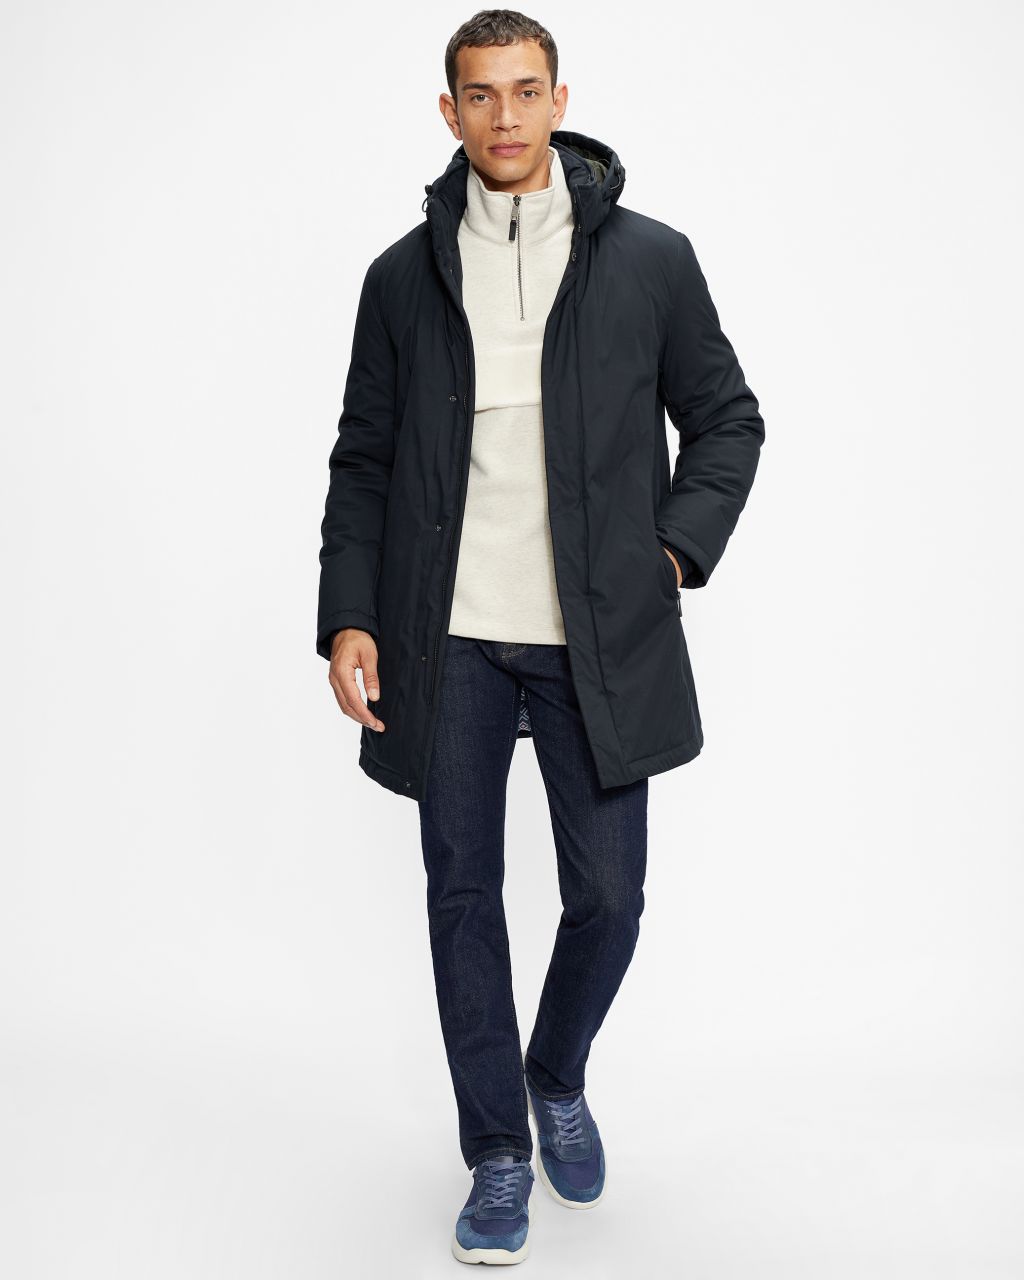 Ted Baker Wadded Coat With Removable Hood in Navy HELVEL, Men's 